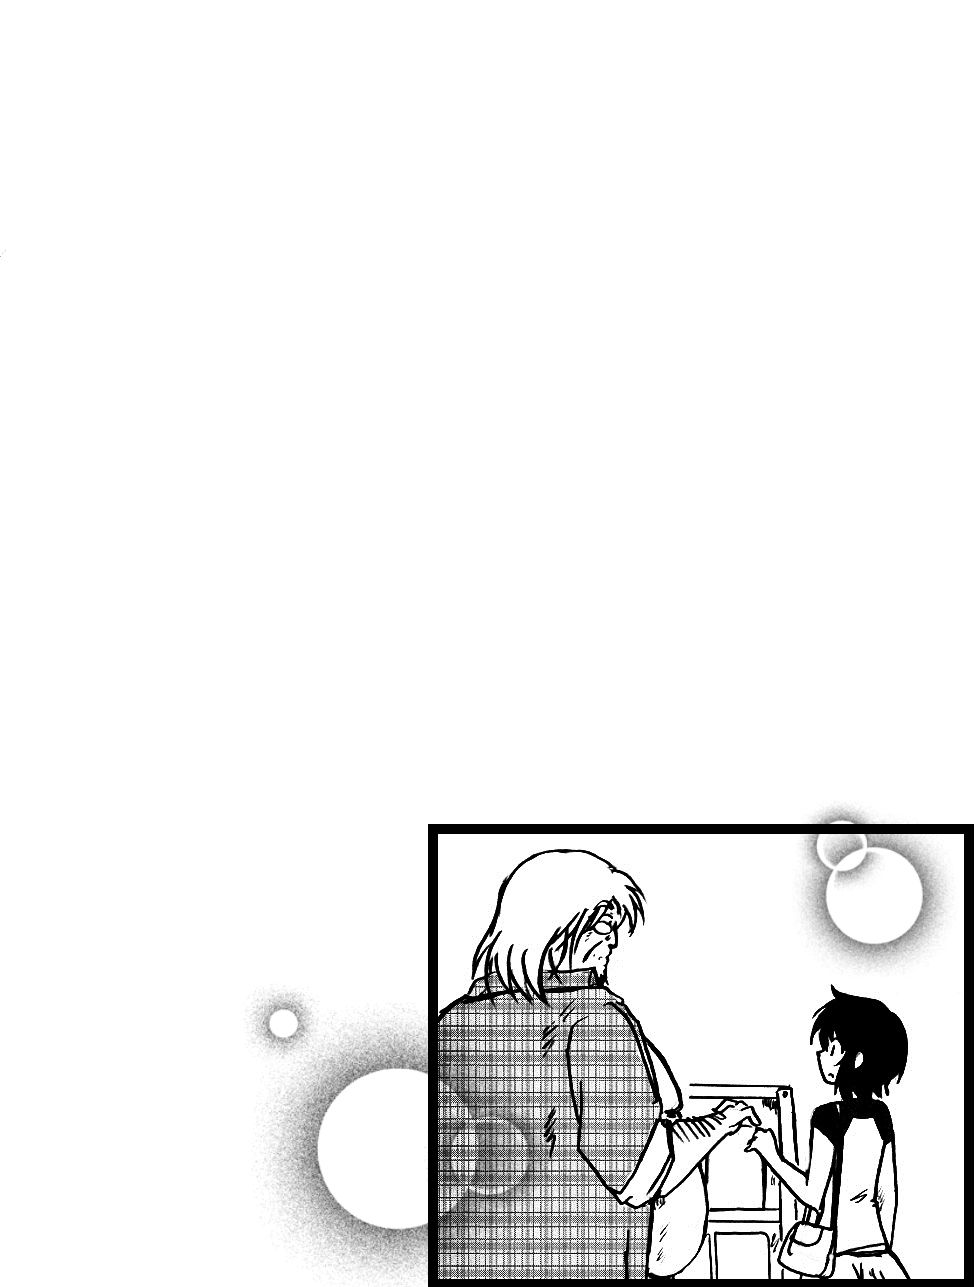 [Ka-iN] Tutor Particular (My Private Tutor) Chapter 1 - 3 [English] (in progress) 38